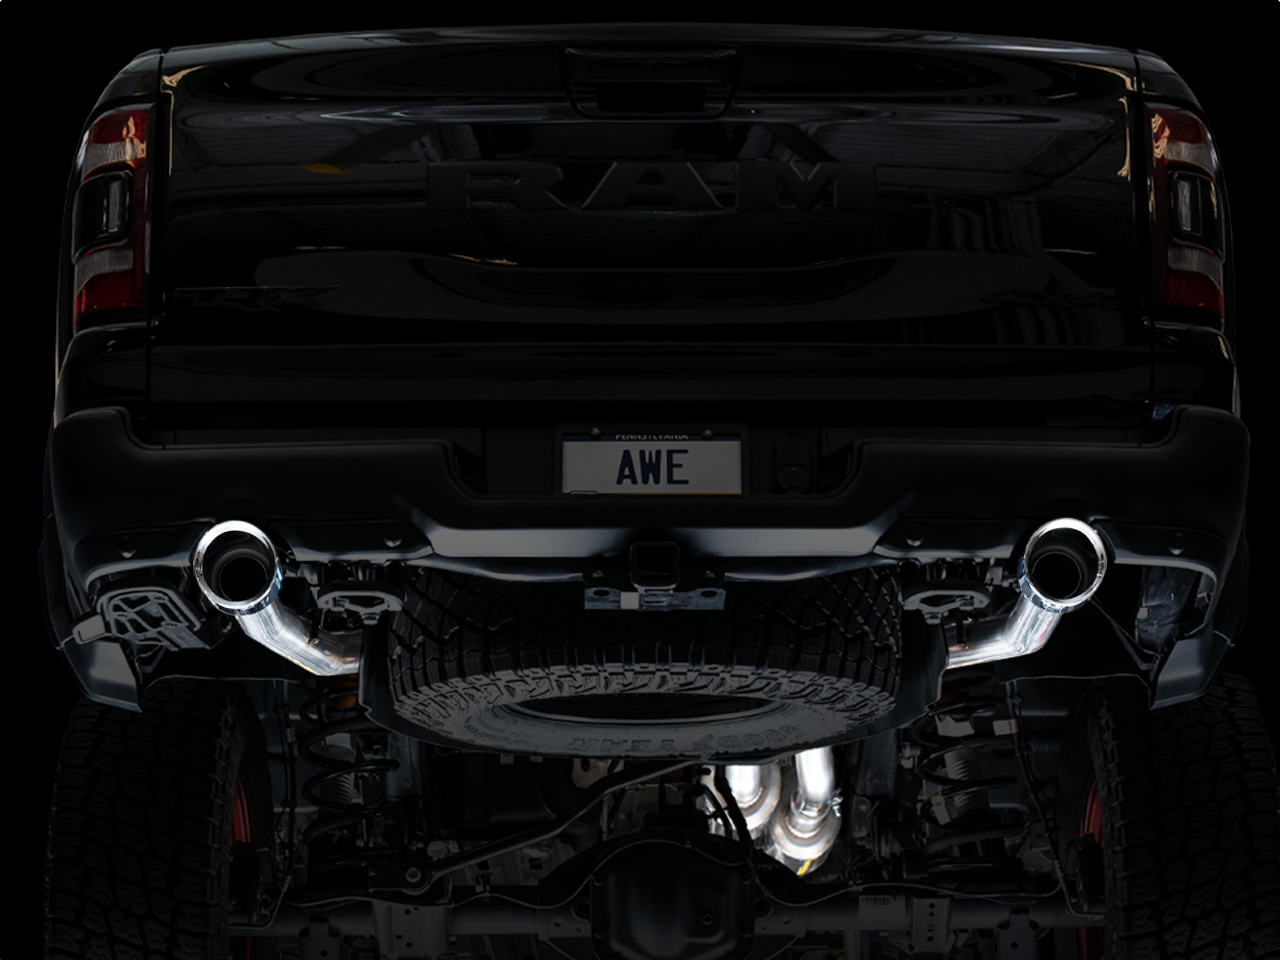 AWE 0FG Exhaust Suite for the RAM 1500 TRX